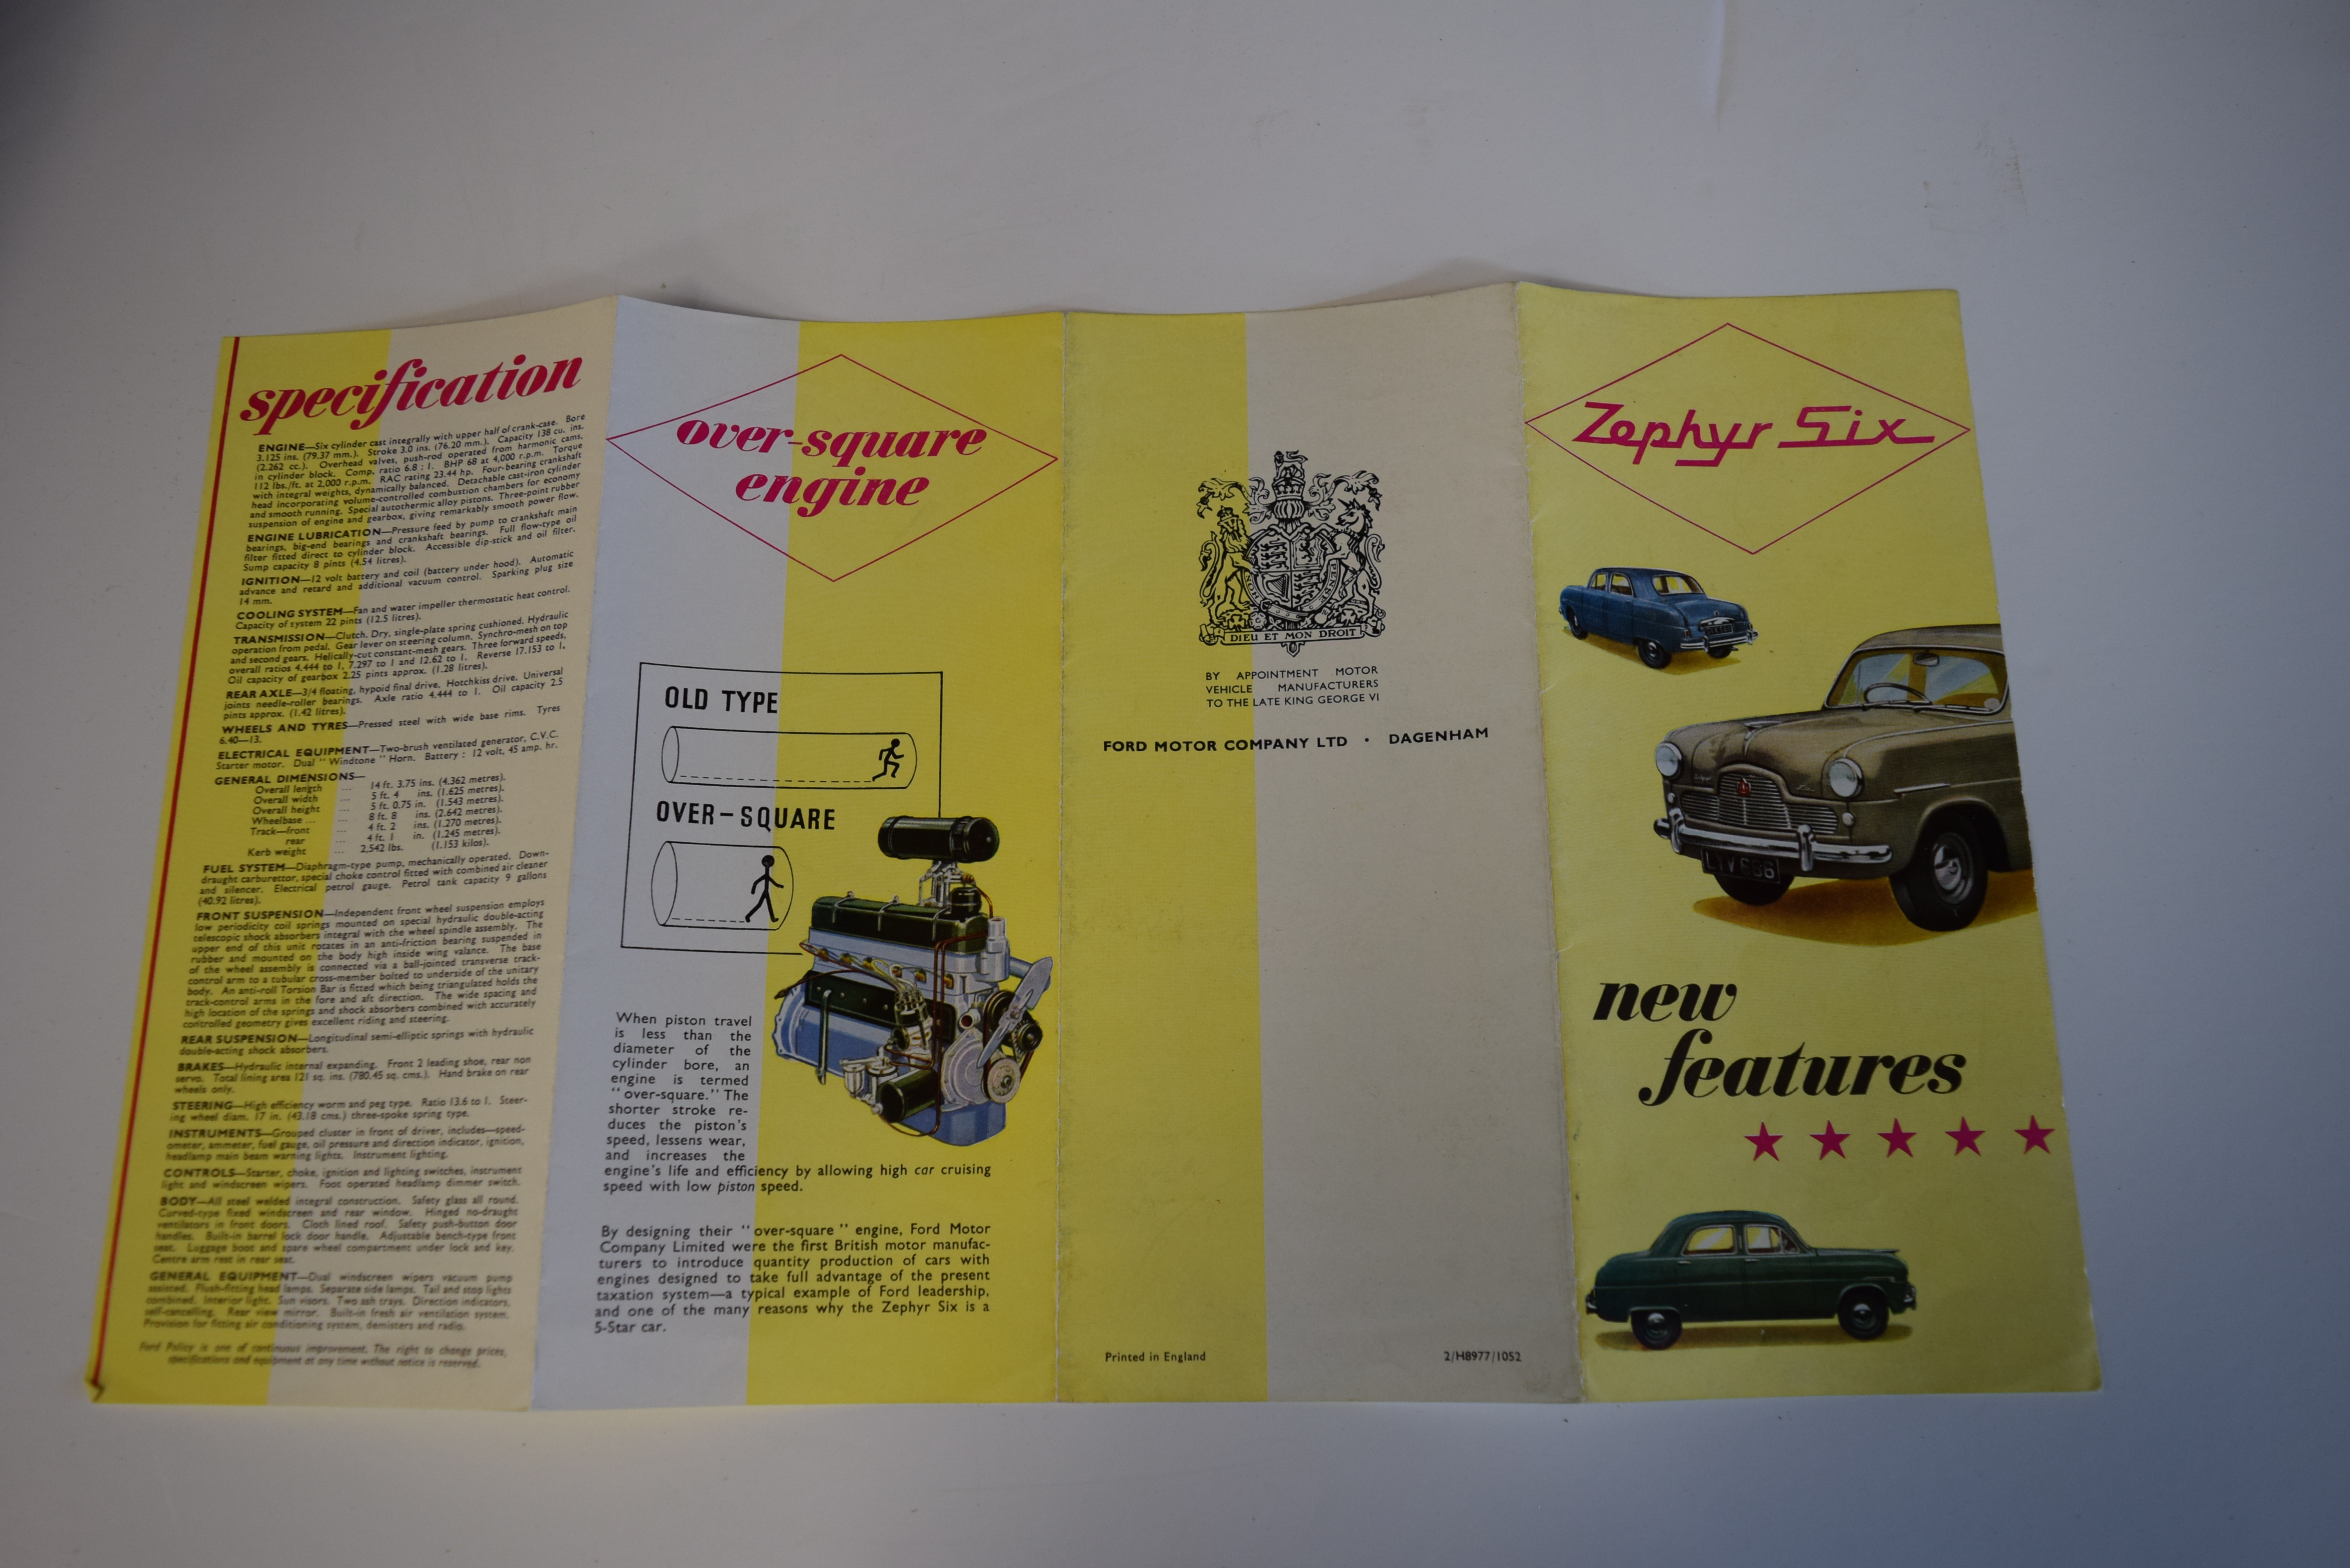 MOTORING BROCHURES: a collection of approx 28 vintage motoring brochures and advertisements, - Image 5 of 5